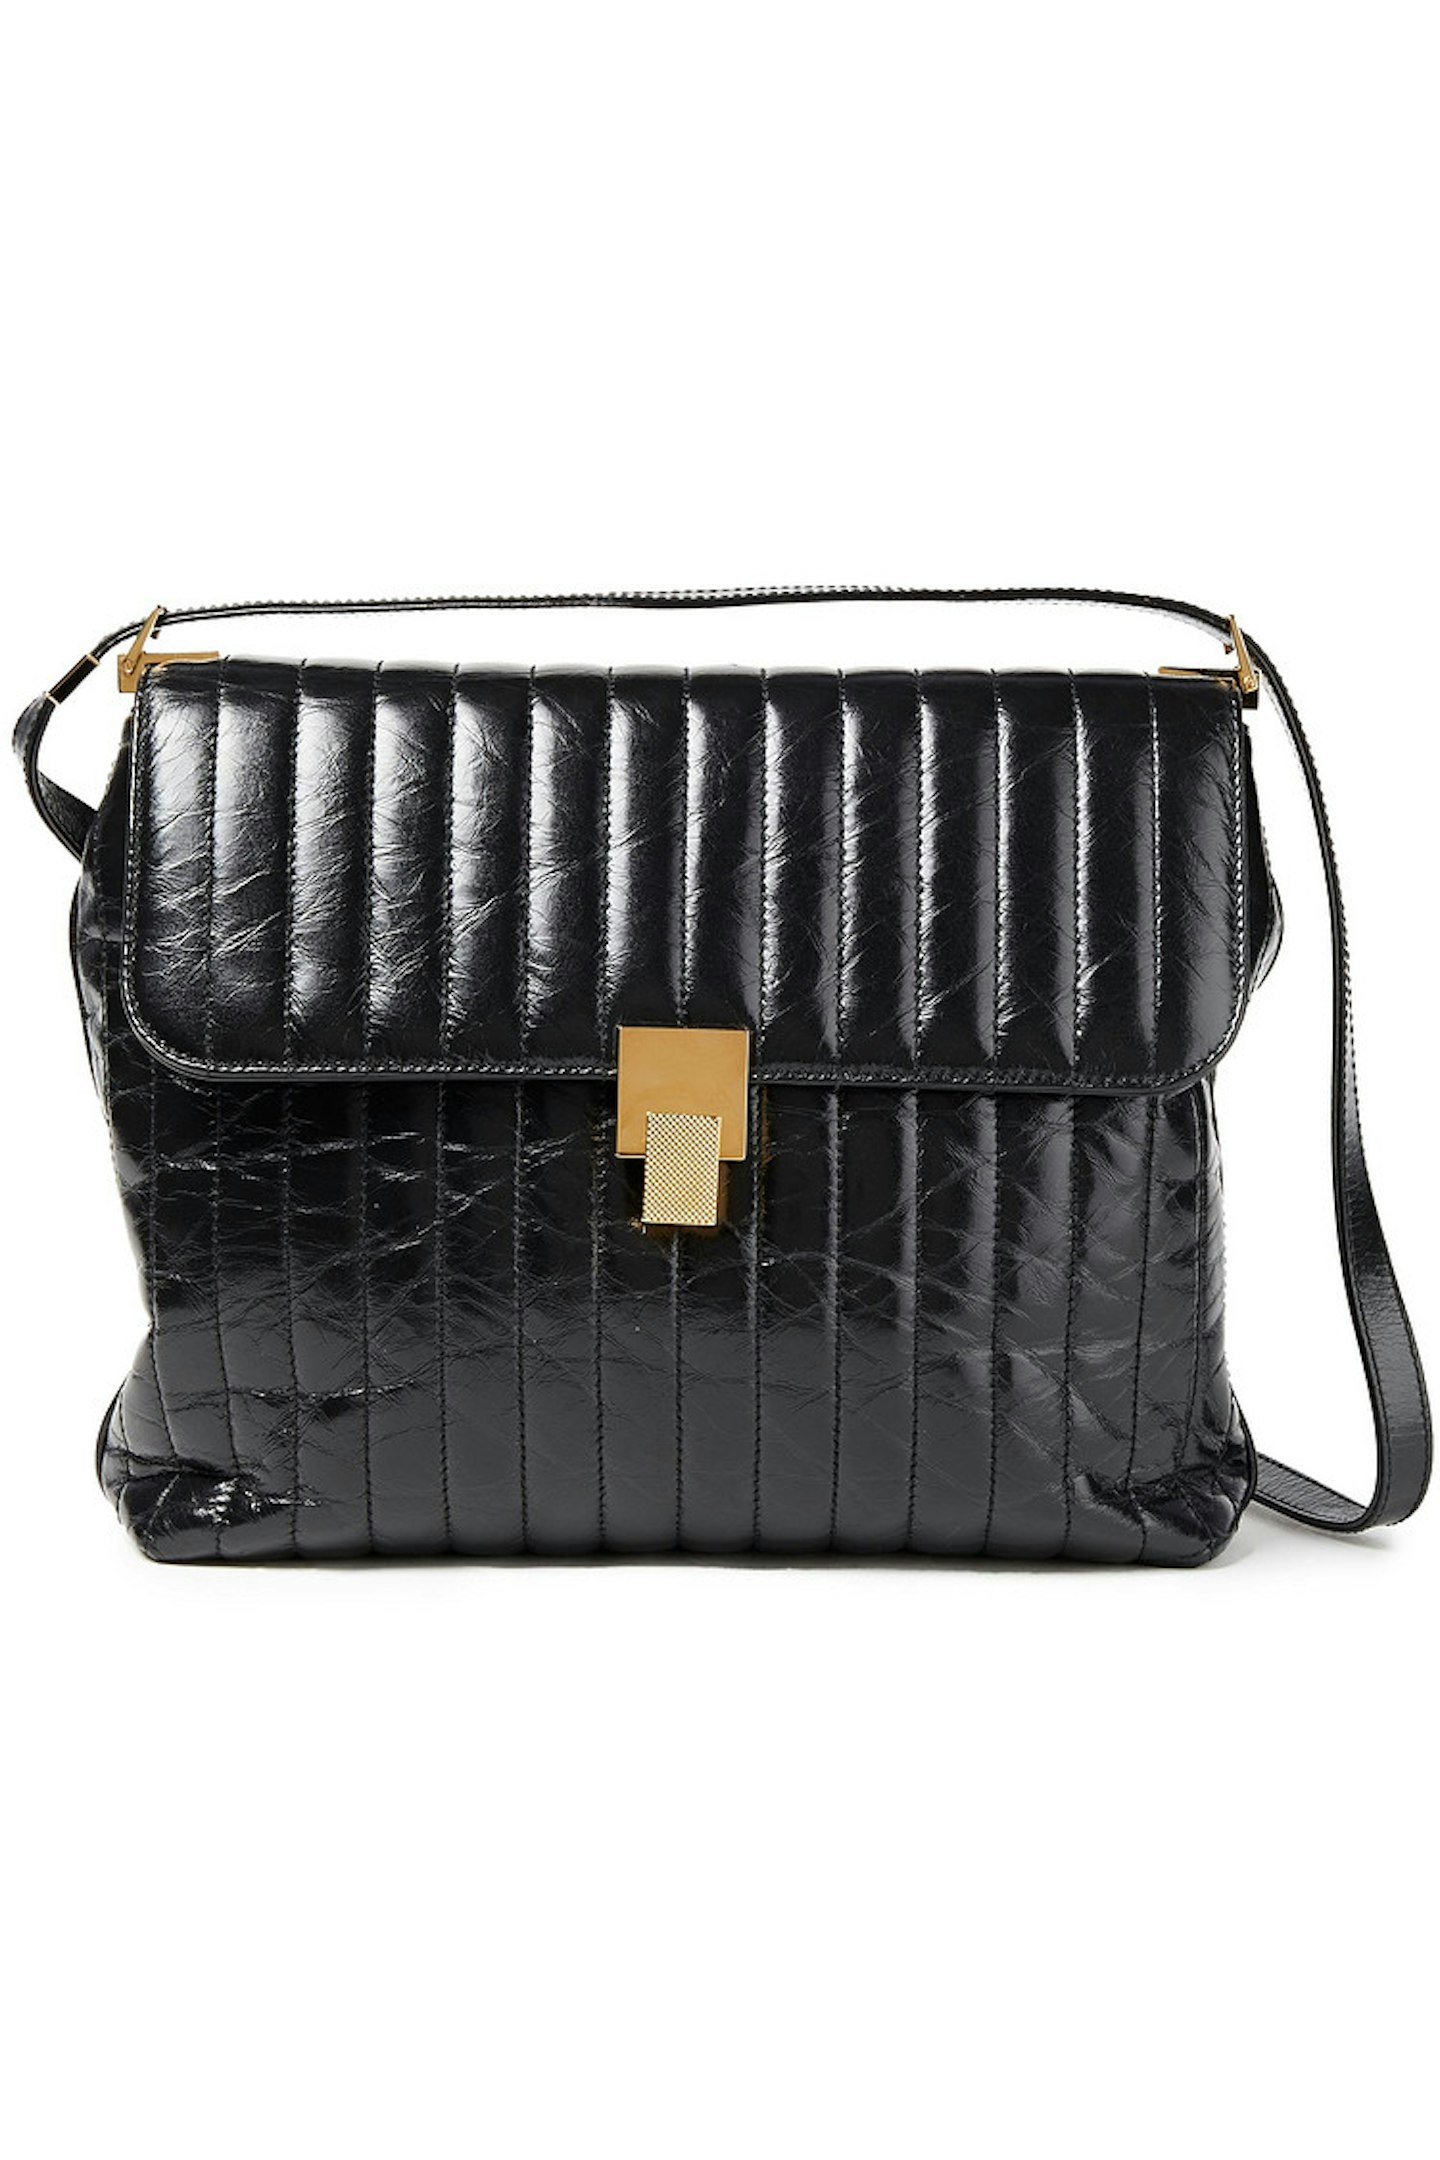 Victoria Beckham at The Outnet, Quinton quilted cracked-leather shoulder bag. £698